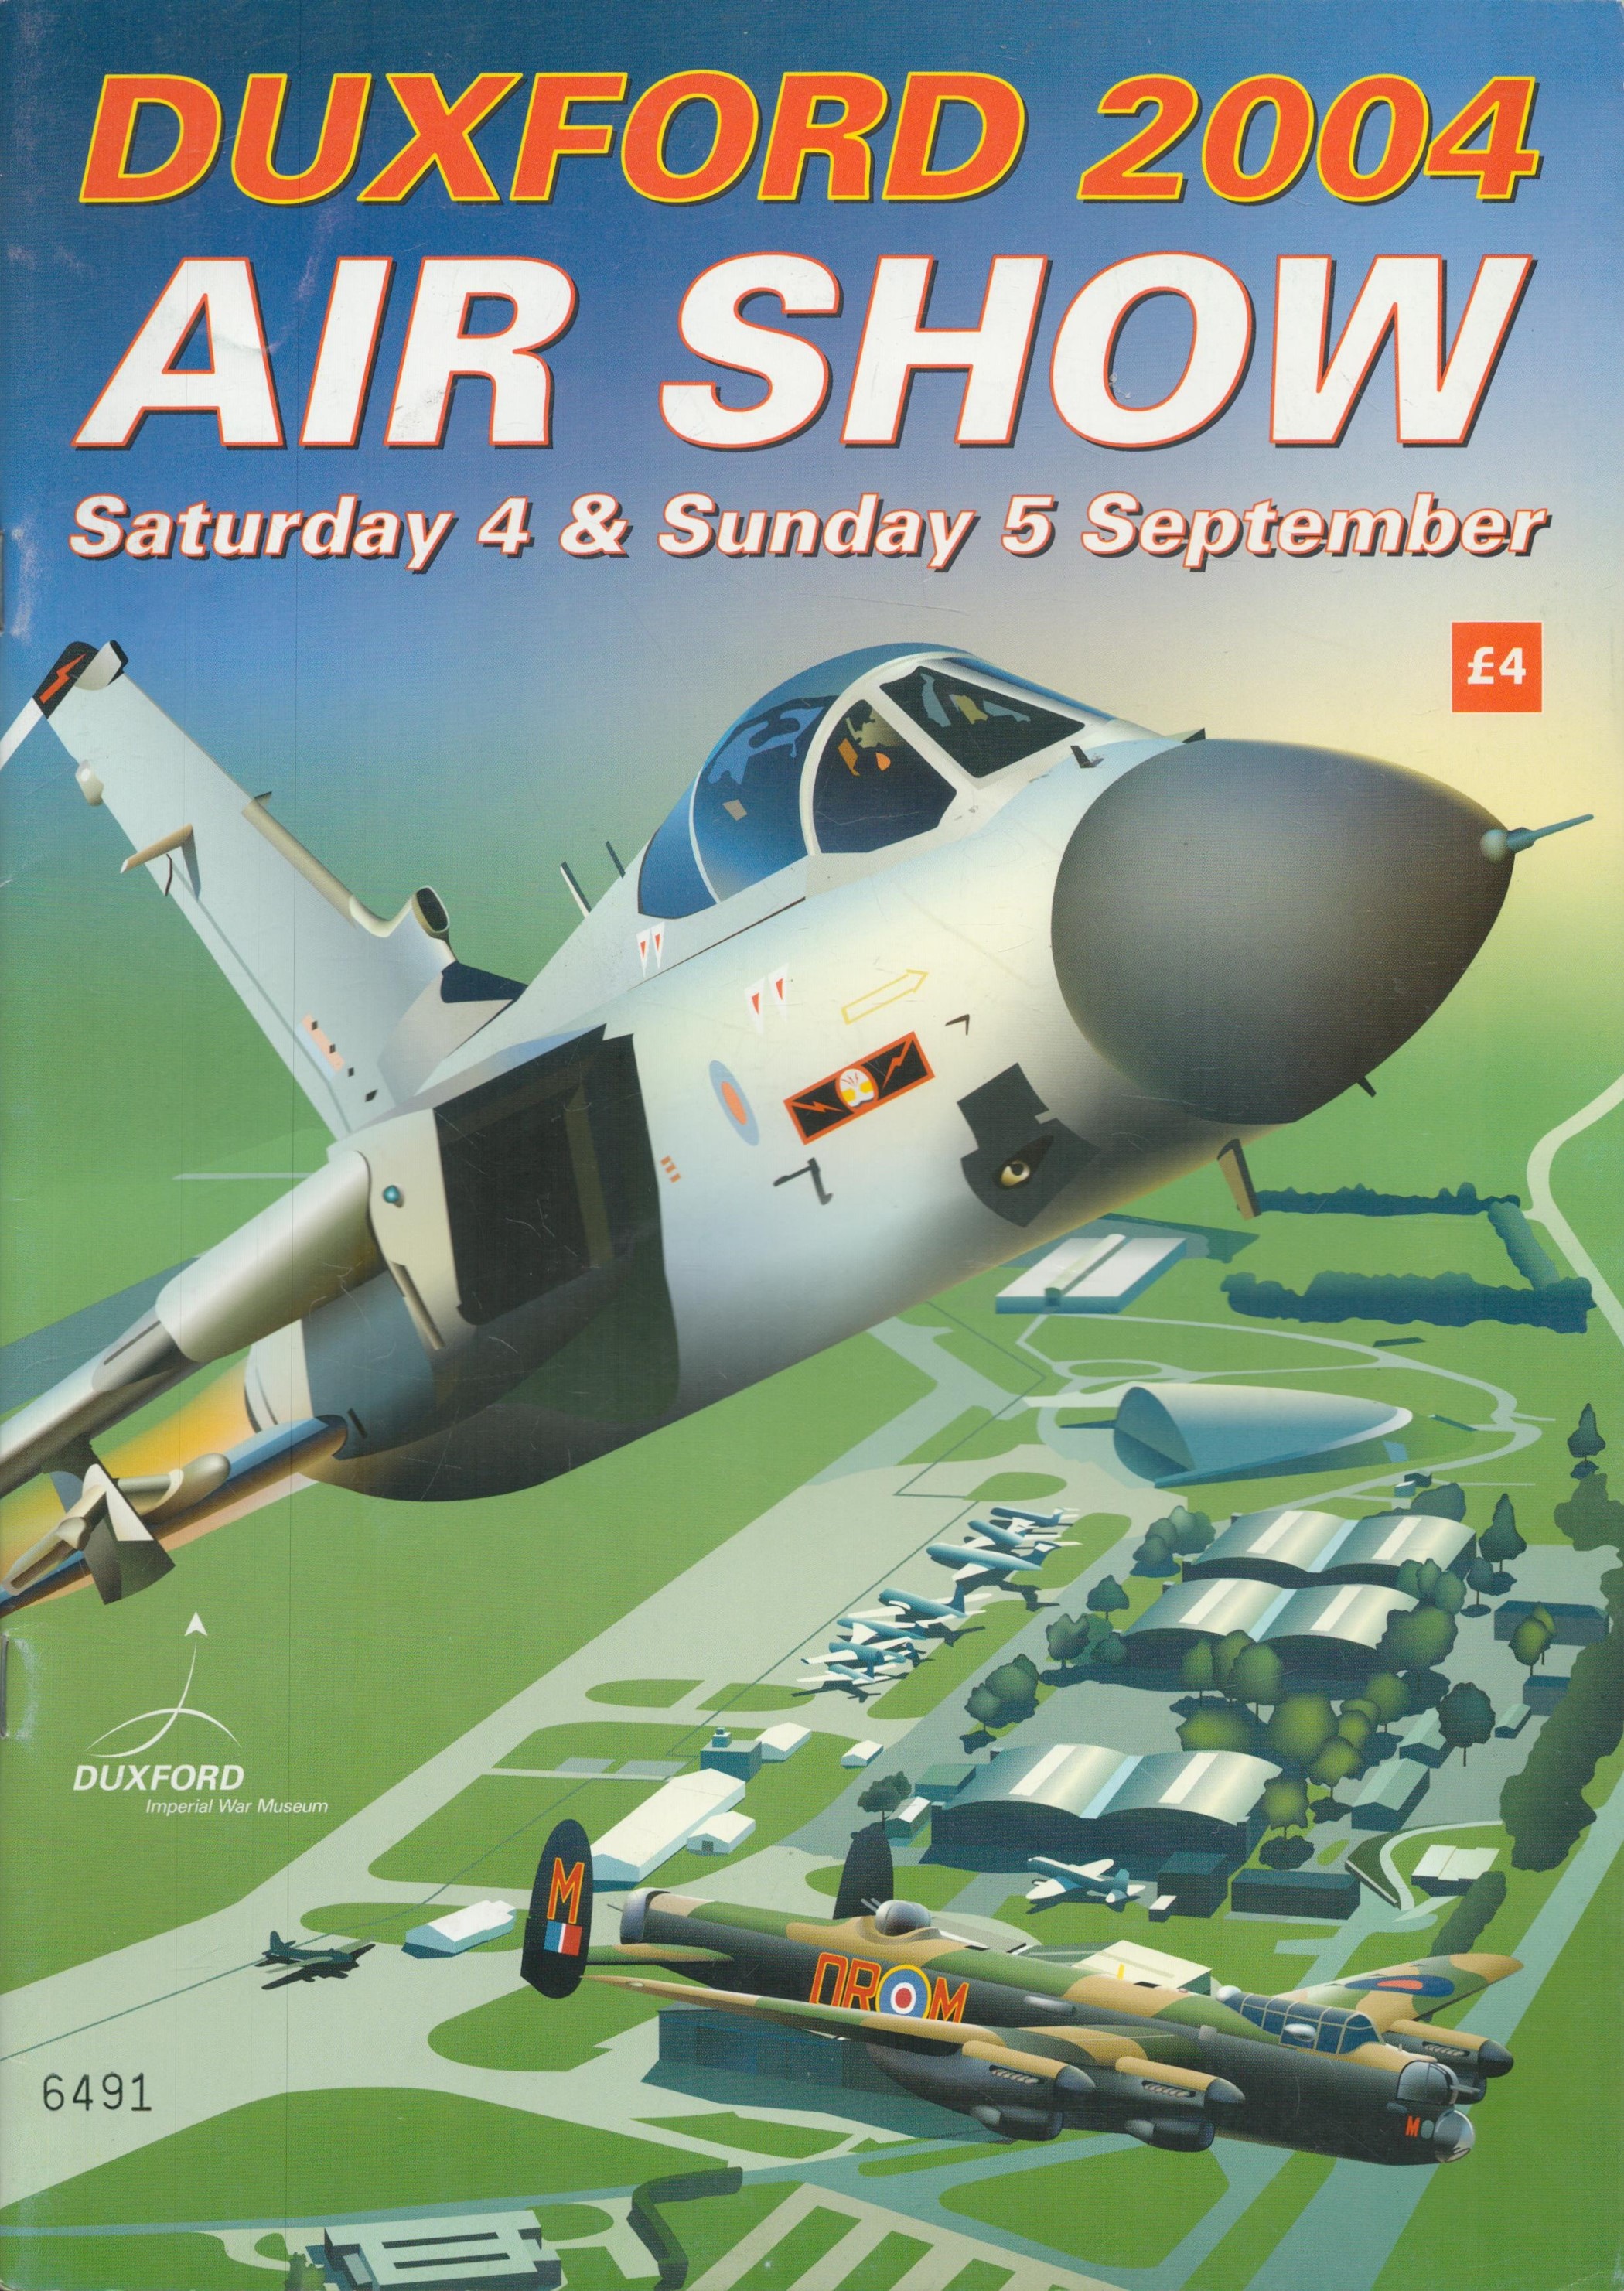 Duxford Air Show Guide 2004, Paperback. Good Condition. All autographs come with a Certificate of - Image 3 of 3